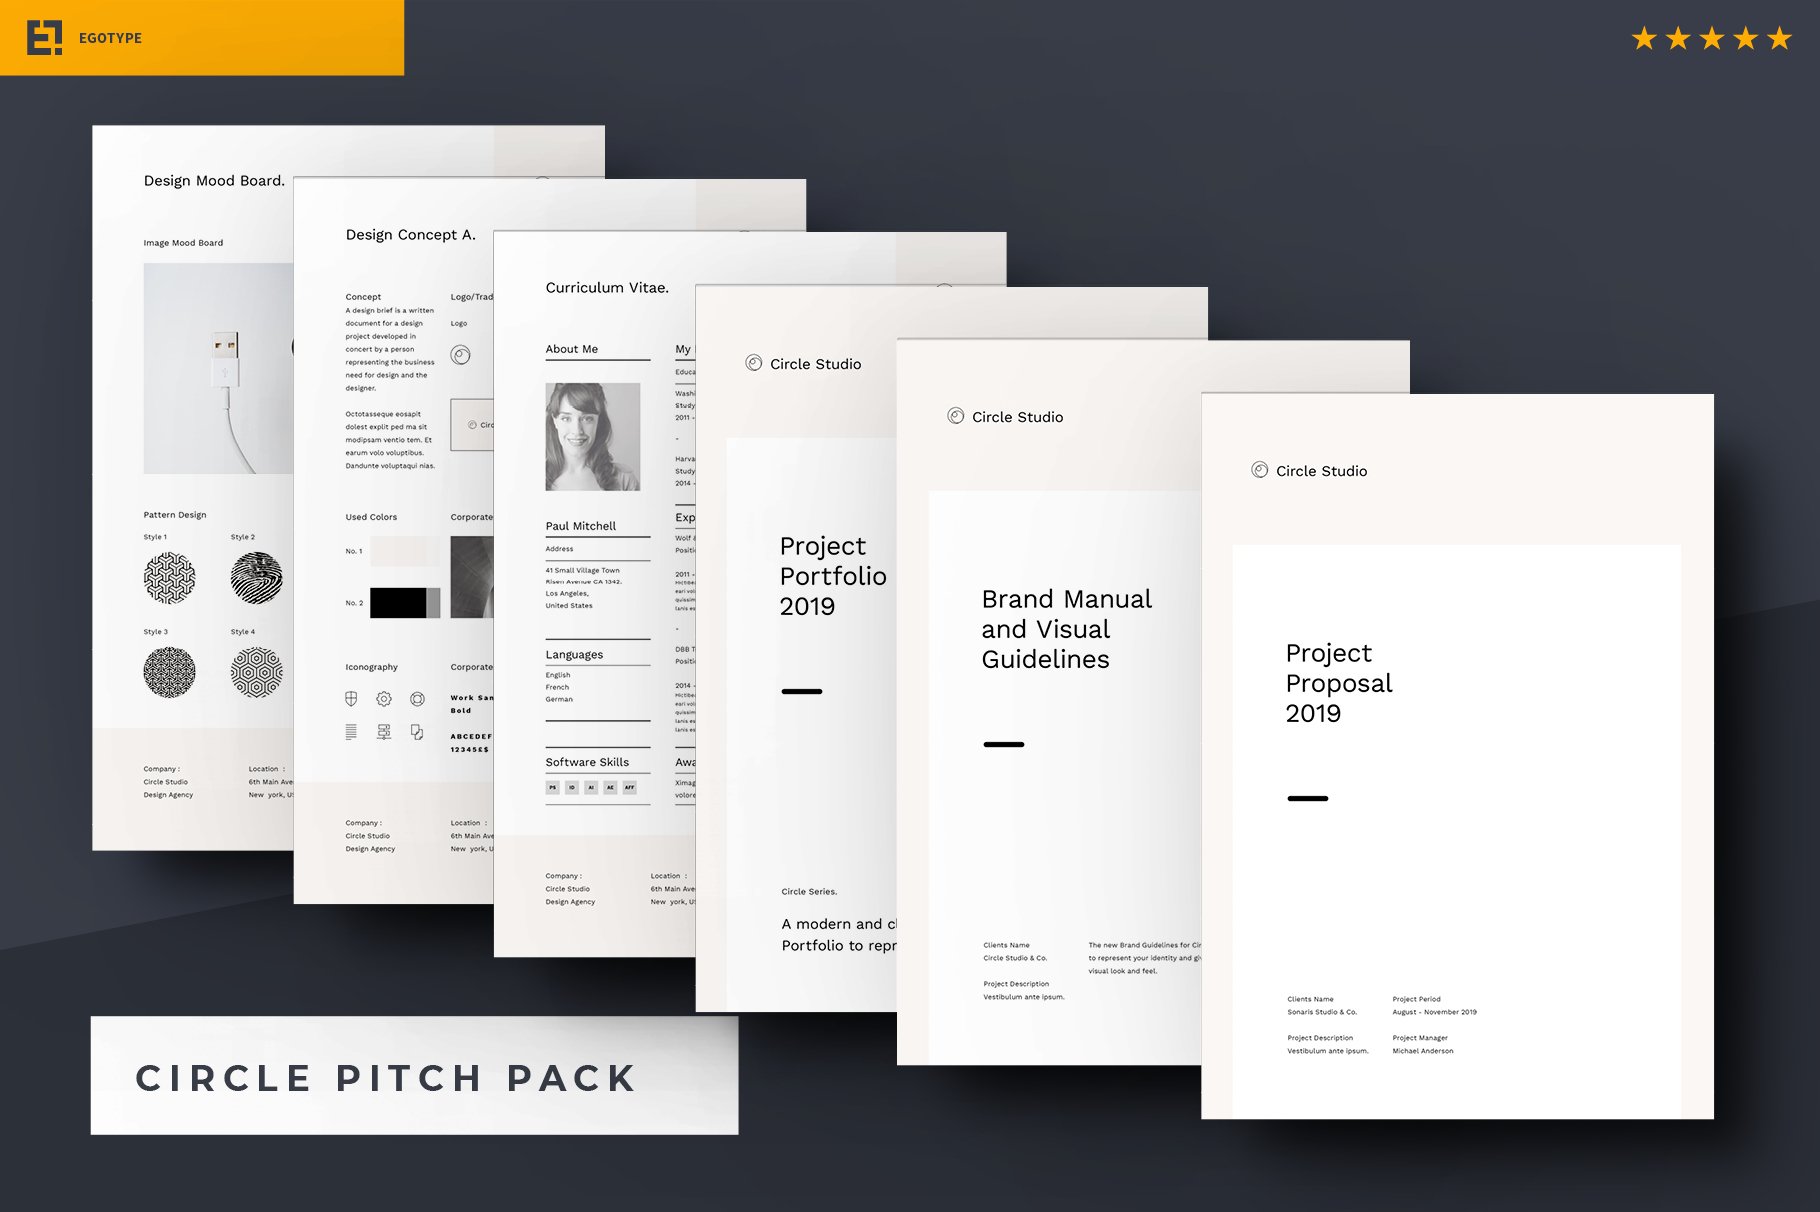 Proposal Pitch Pack cover image.